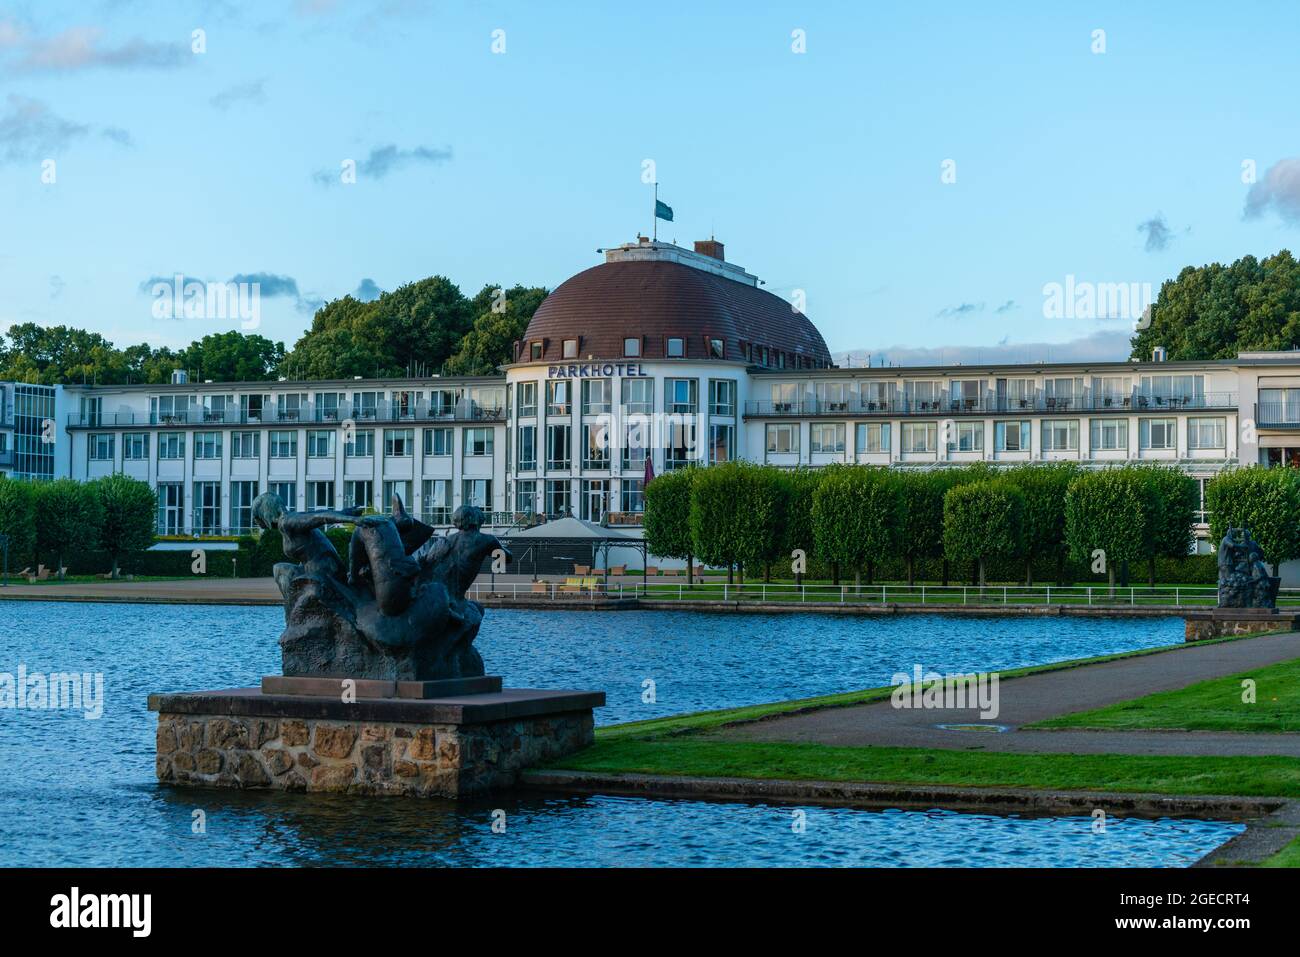 The Parkhotel in the 19th century Bürgerpark Hansestadt Bremen or Main City Park Hanseatic City of Bremen, Federal State of Bremen, Northern Germany Stock Photo